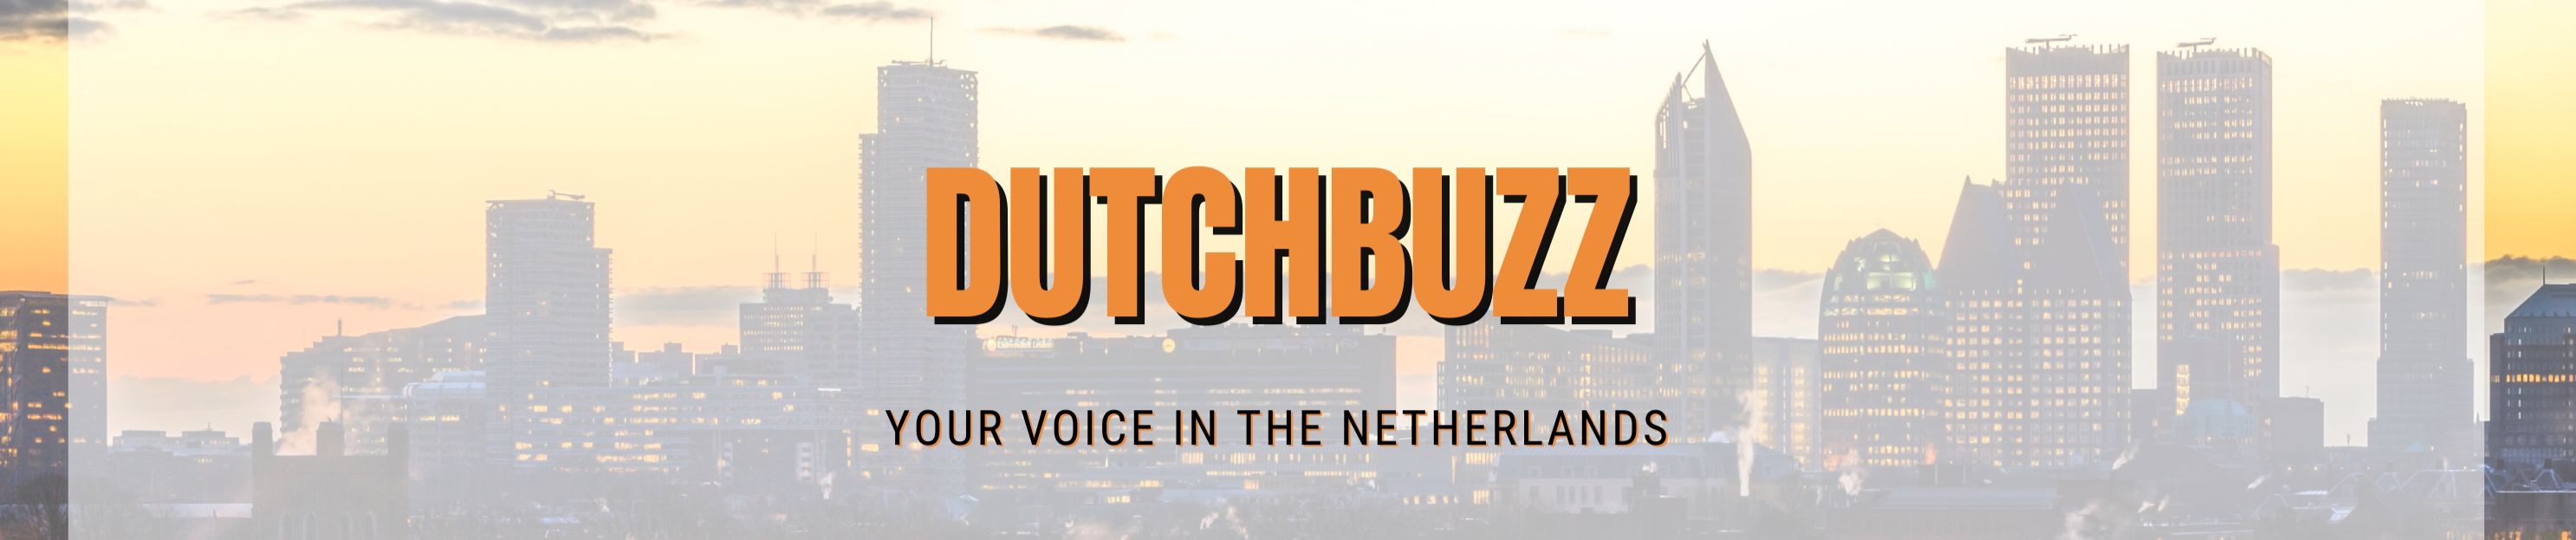 DUTCHBUZZ - Enjoy King's Night & Day in The Hague! Listen to the